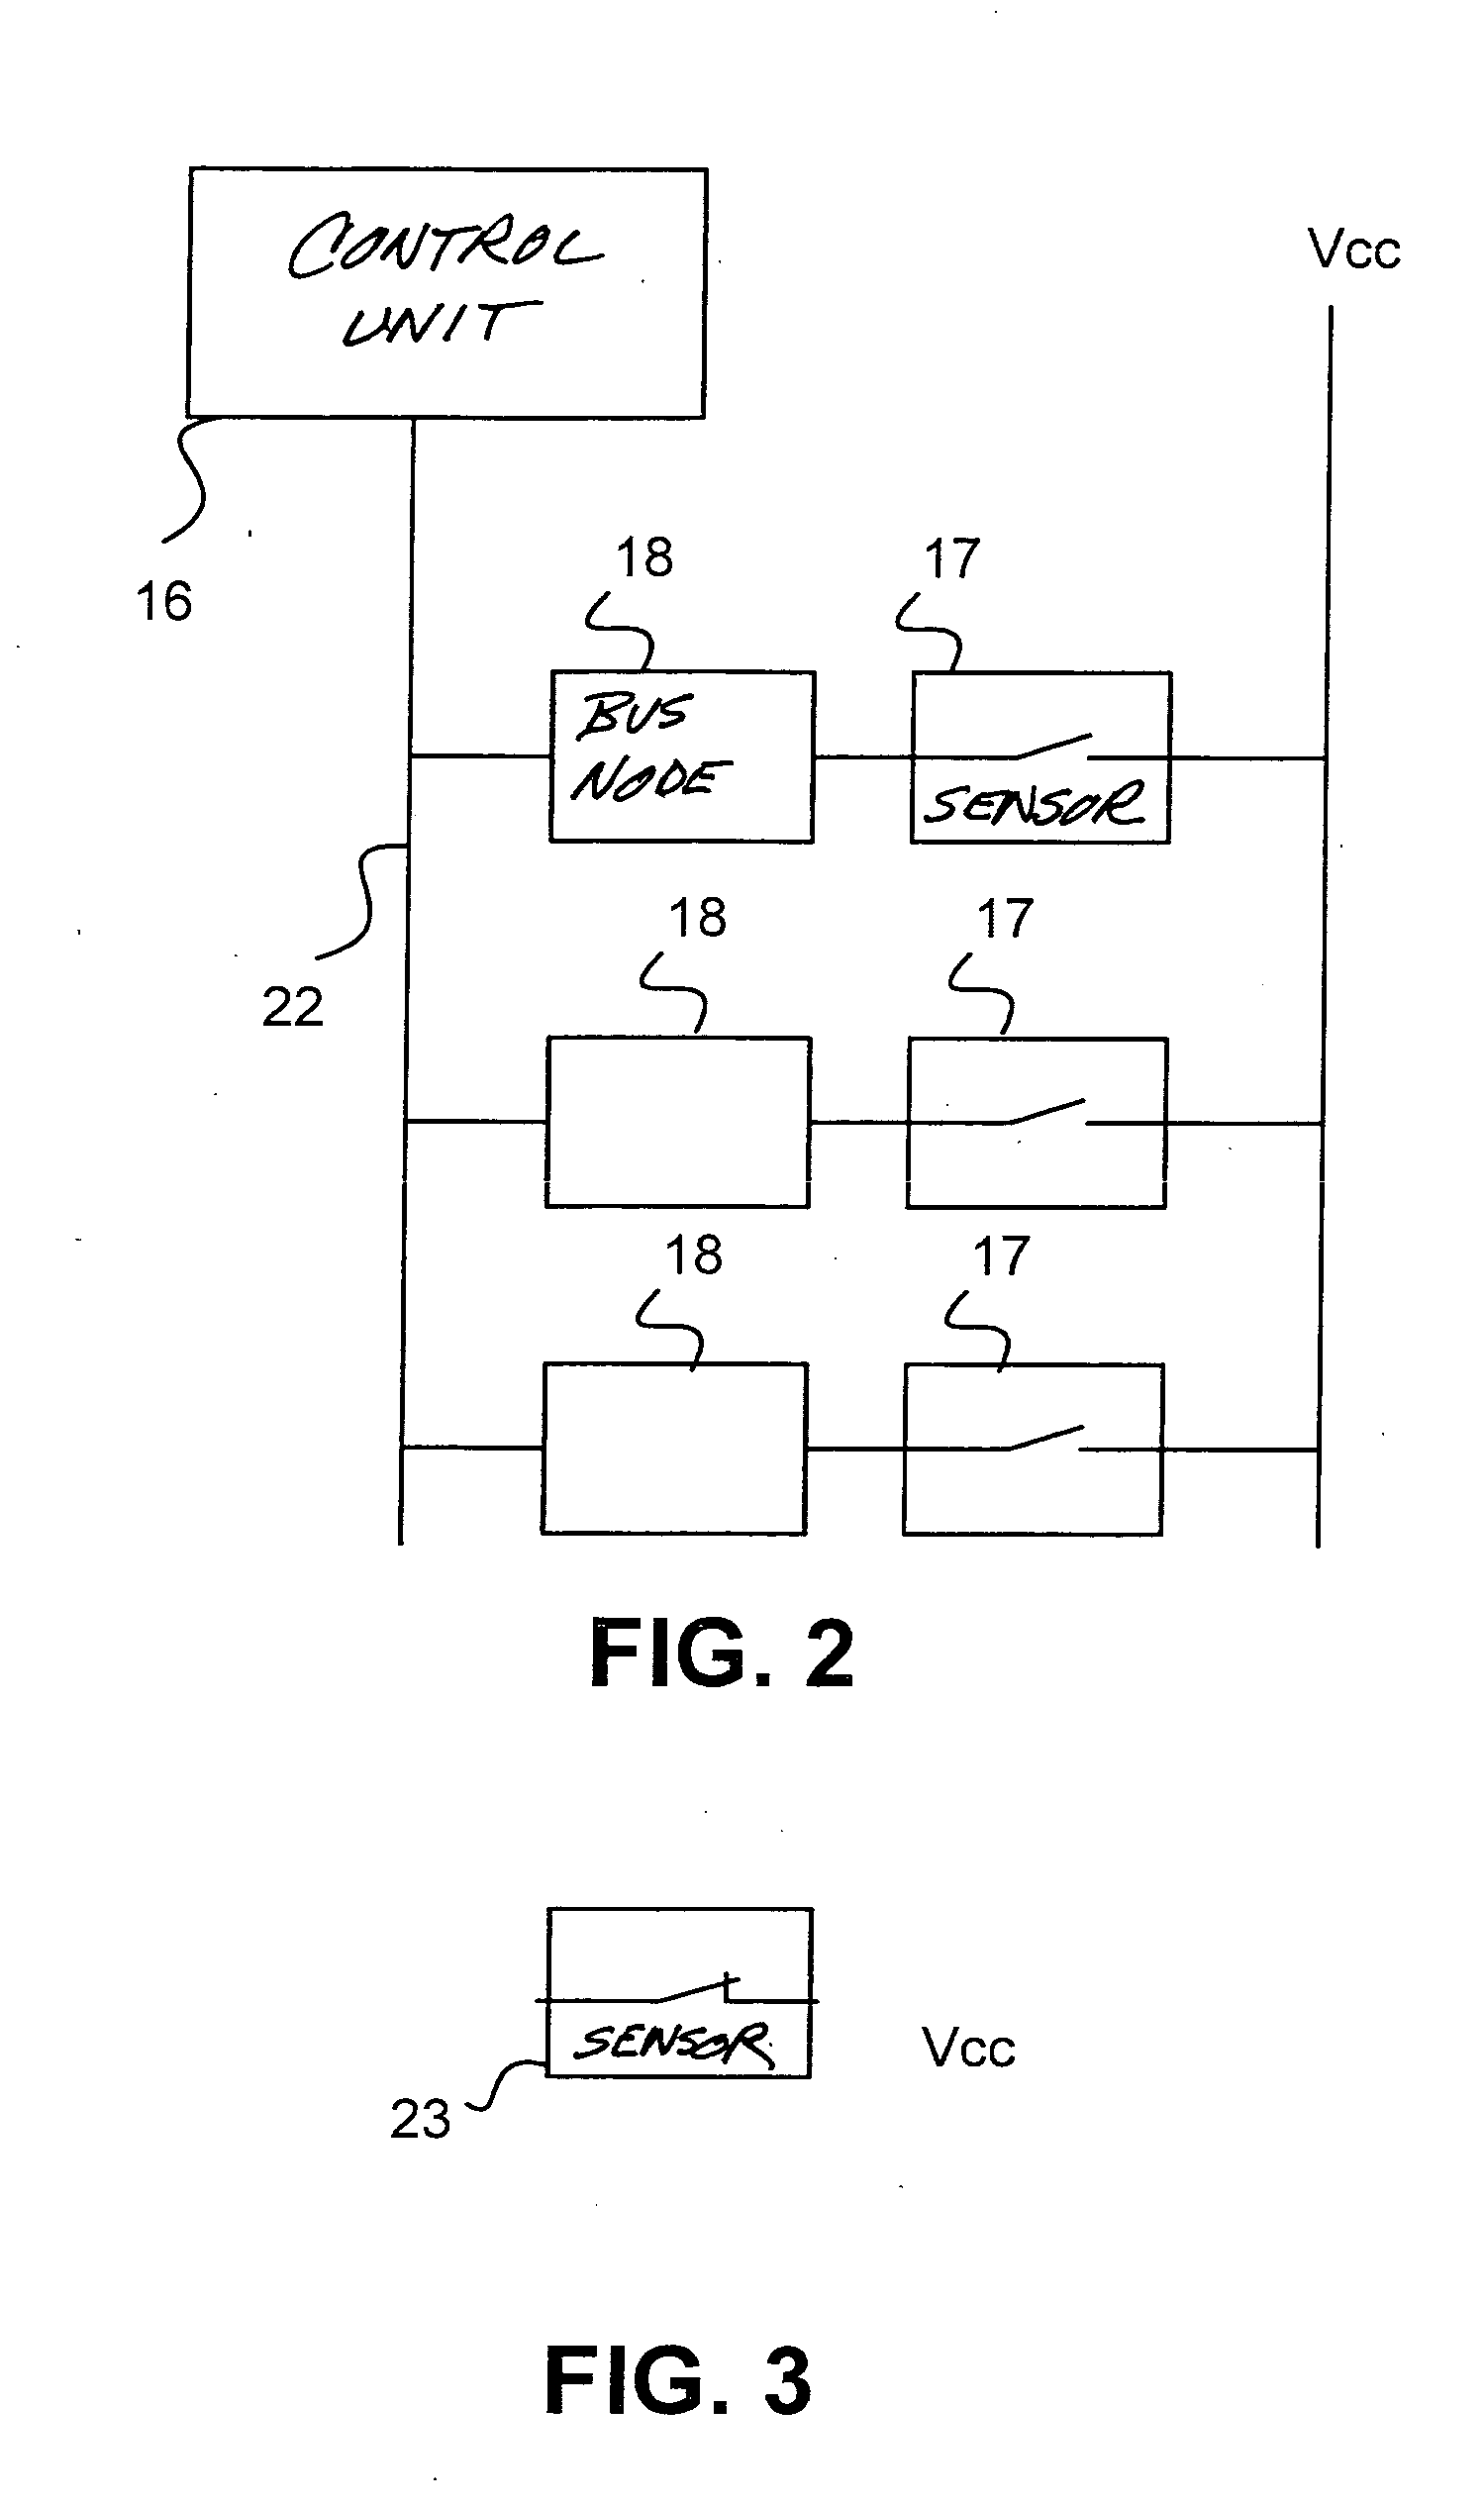 Elevator installation and monitoring system for an elevator installation